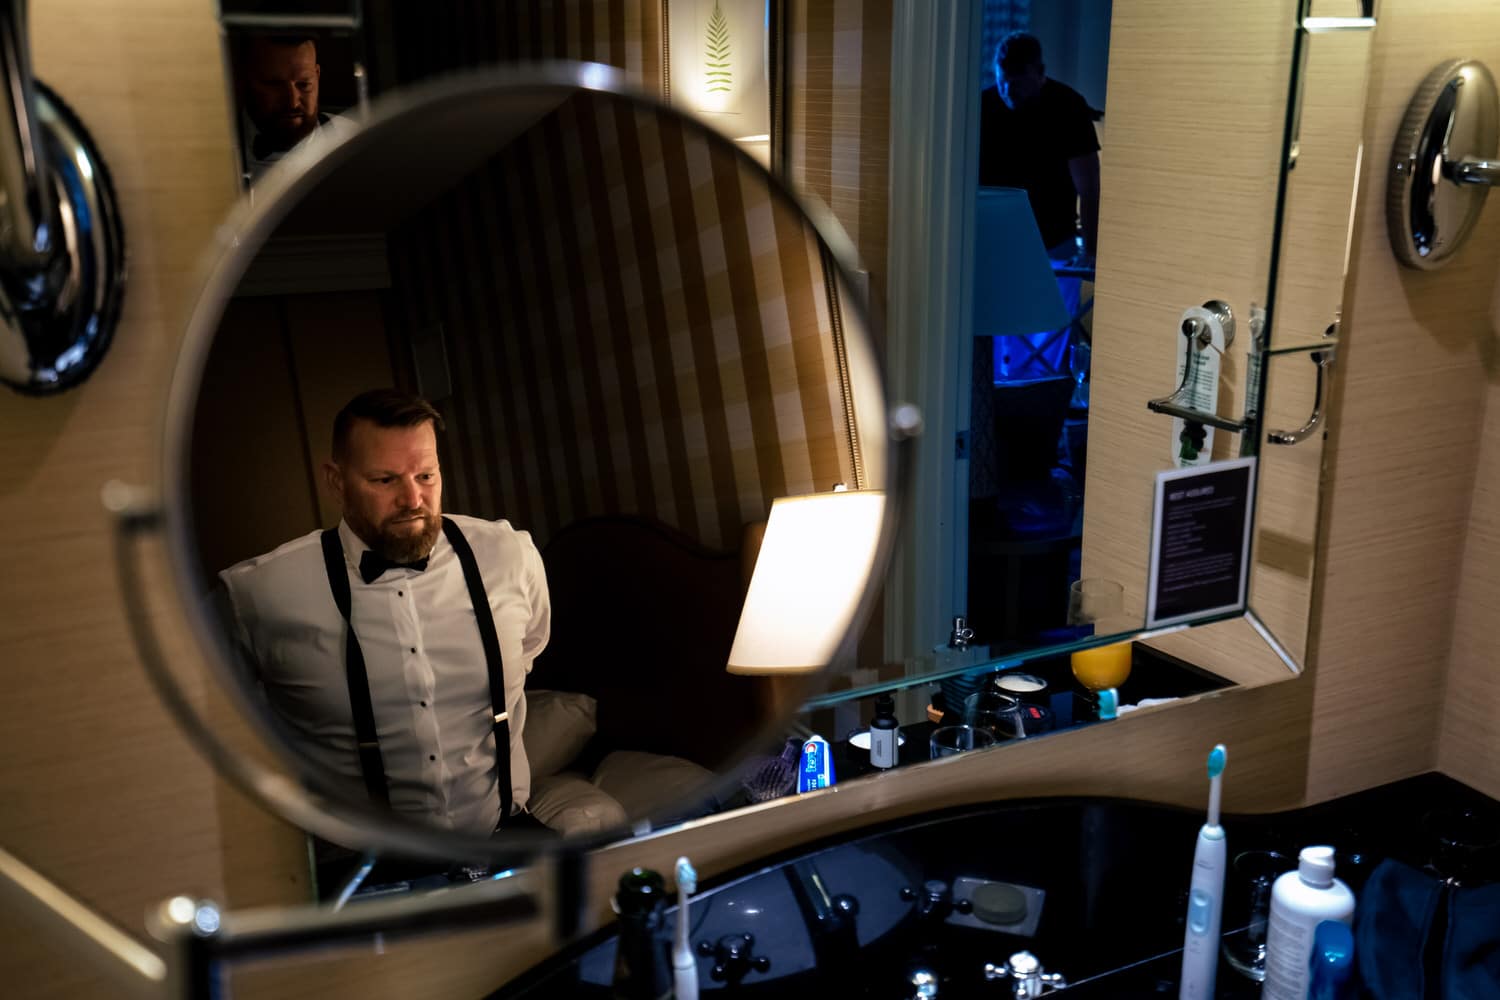 A candid picture taken in the reflection of a mirror of a groom in suspenders tucking his dress shirt into his pants. 